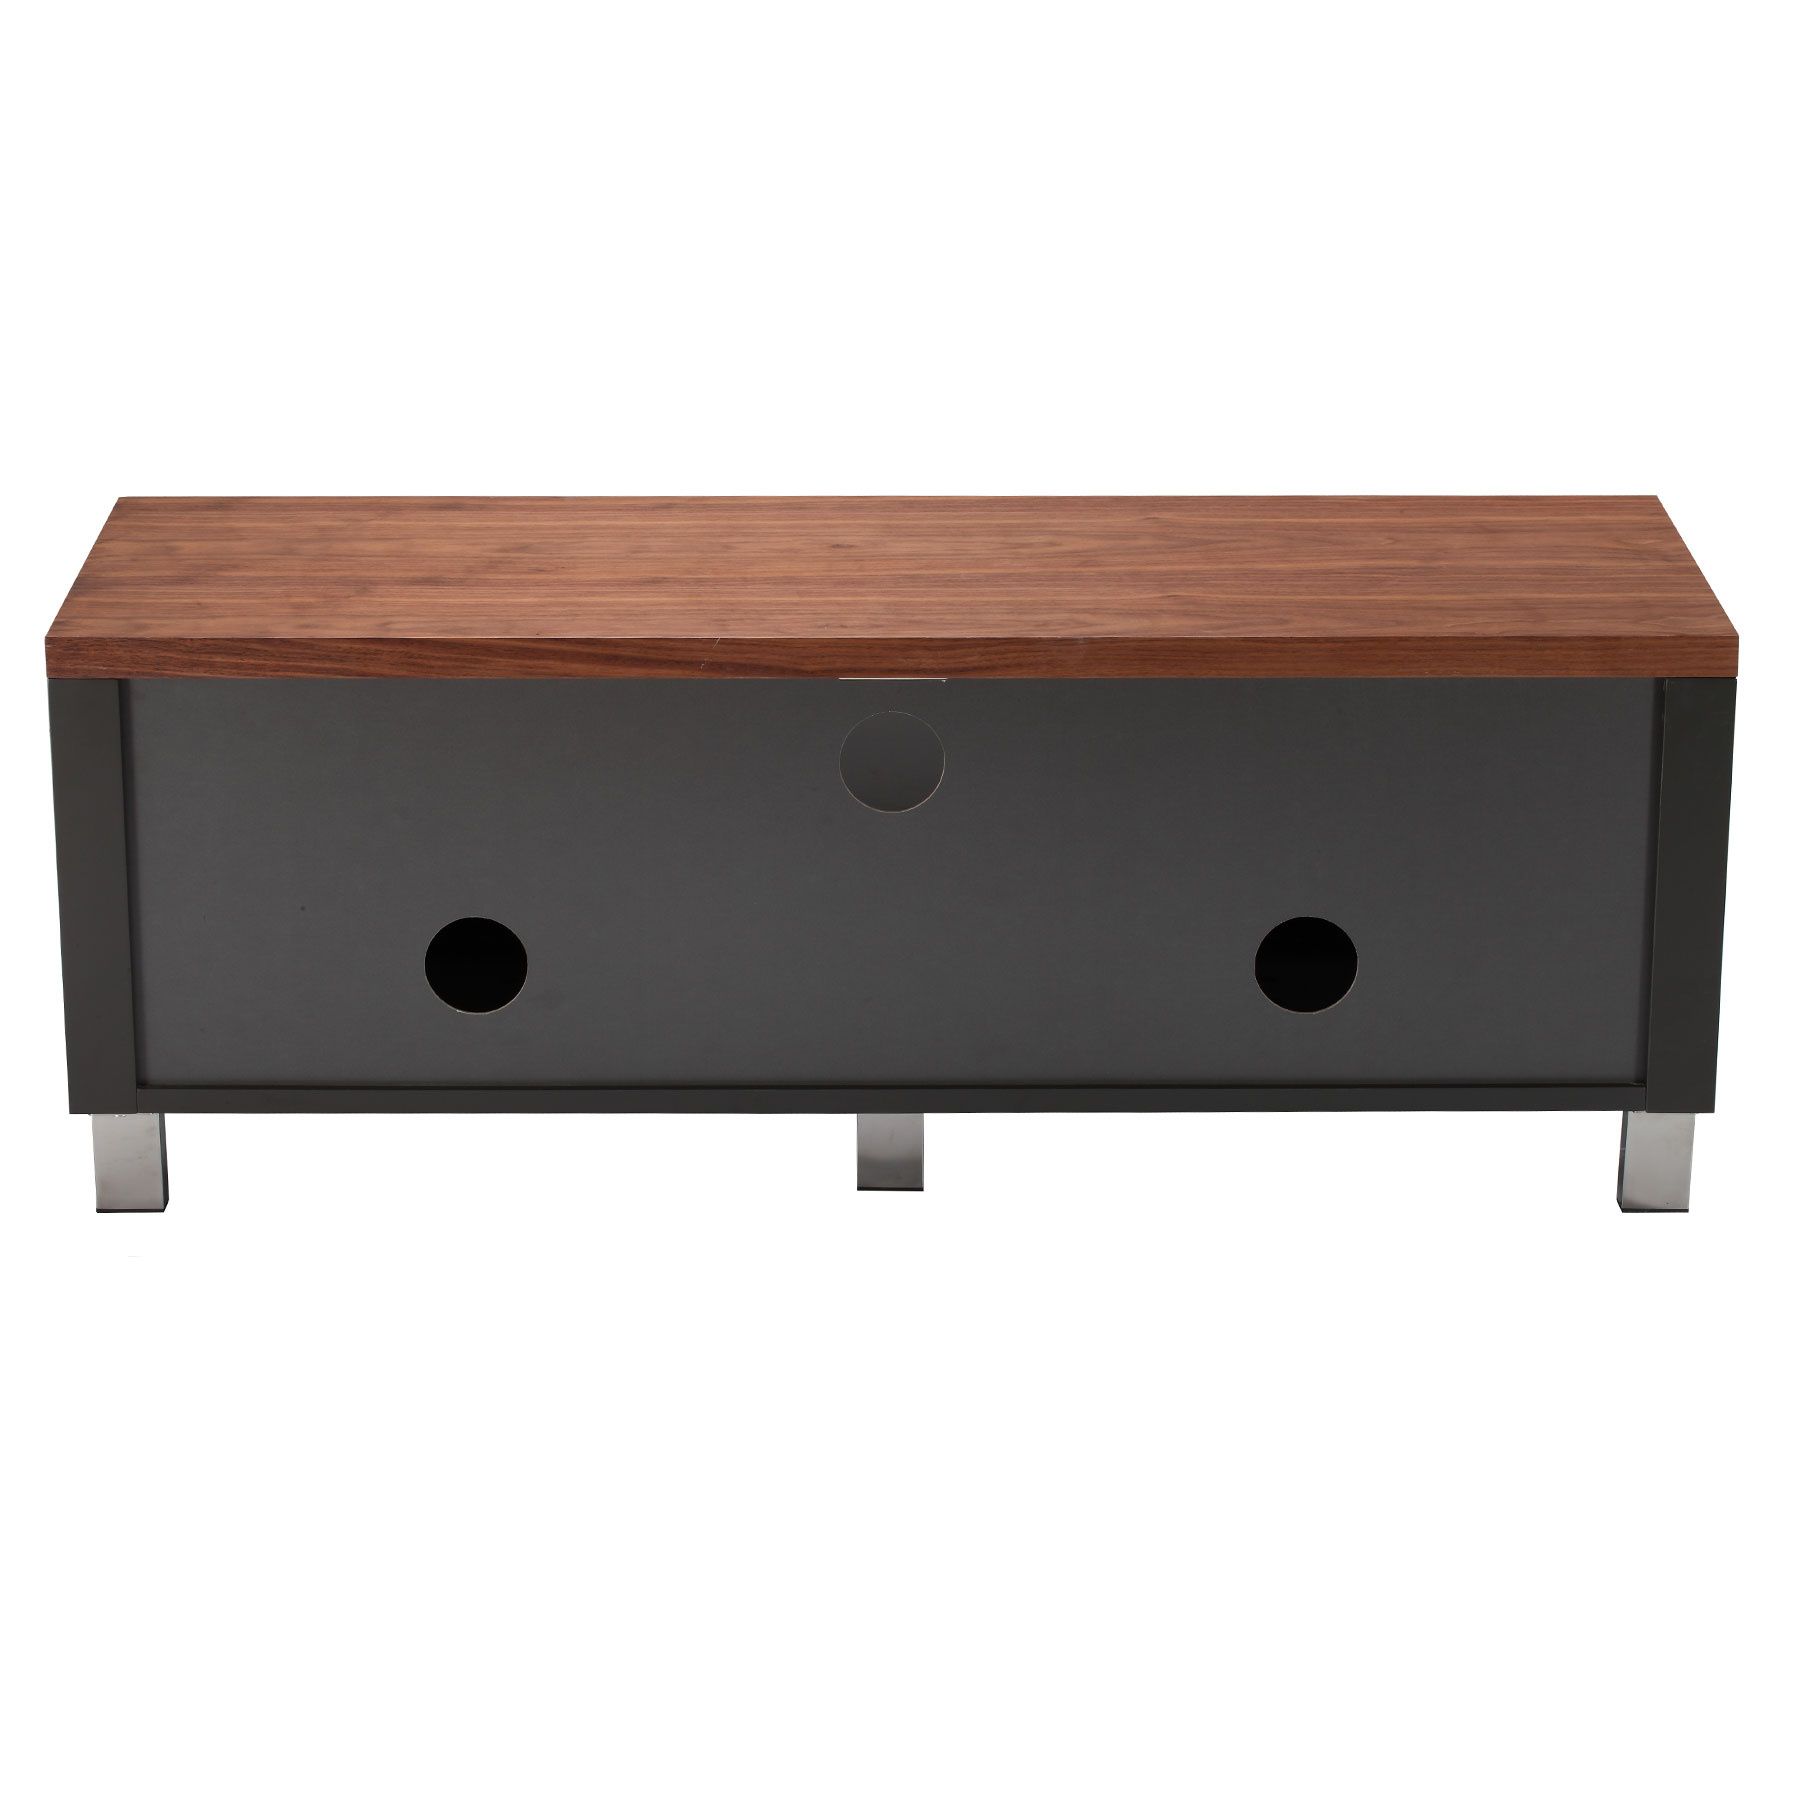 Avenir Tv Stands For Tvs Up To 60" In Well Known Alphason Regent 120cm Walnut Tv Stand For Up To 60" Tvs (View 19 of 20)